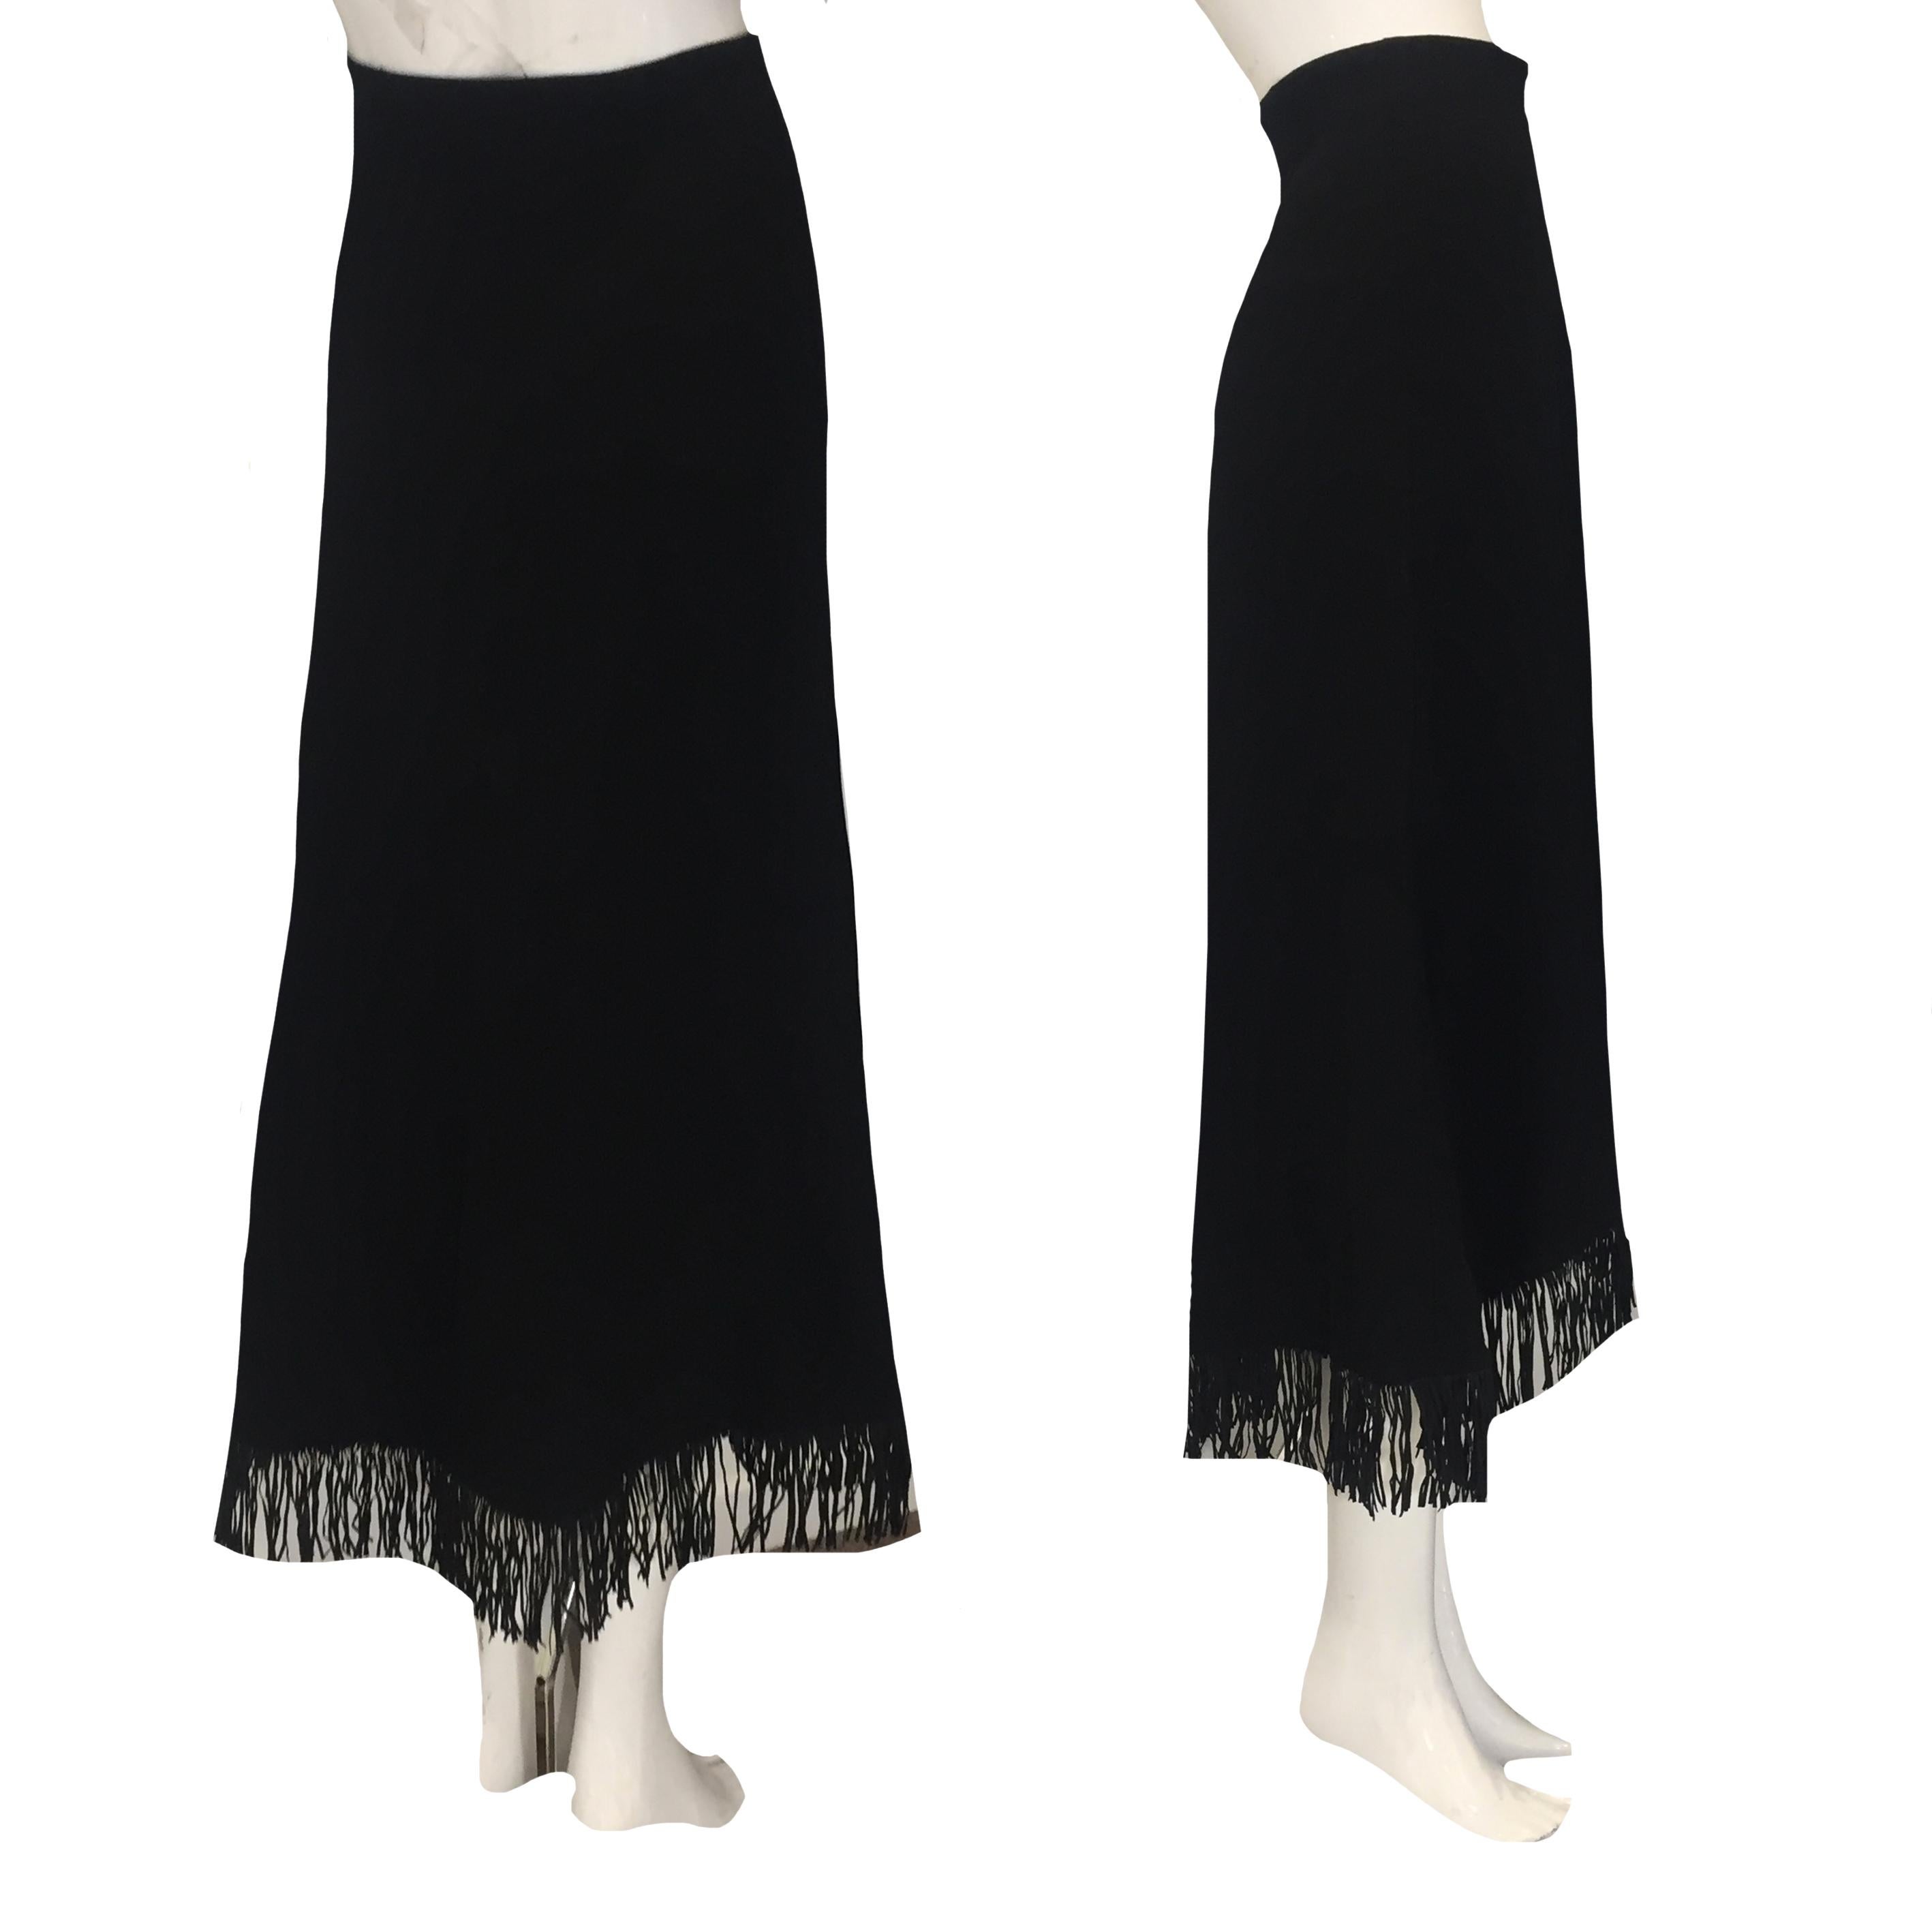 CHANTAL THOMASS FW93 Wrap black skirt with fringes

Tag CHANTAL THOMASS

Size S

Length ( back ) : 96 cm

Length ( front ) : 72 cm

Waist: 33 cm

Material: 100% Wool

Lining: 100% acetate

Fringes: 60% nylon/ 40% spandex

Close with a zip on the